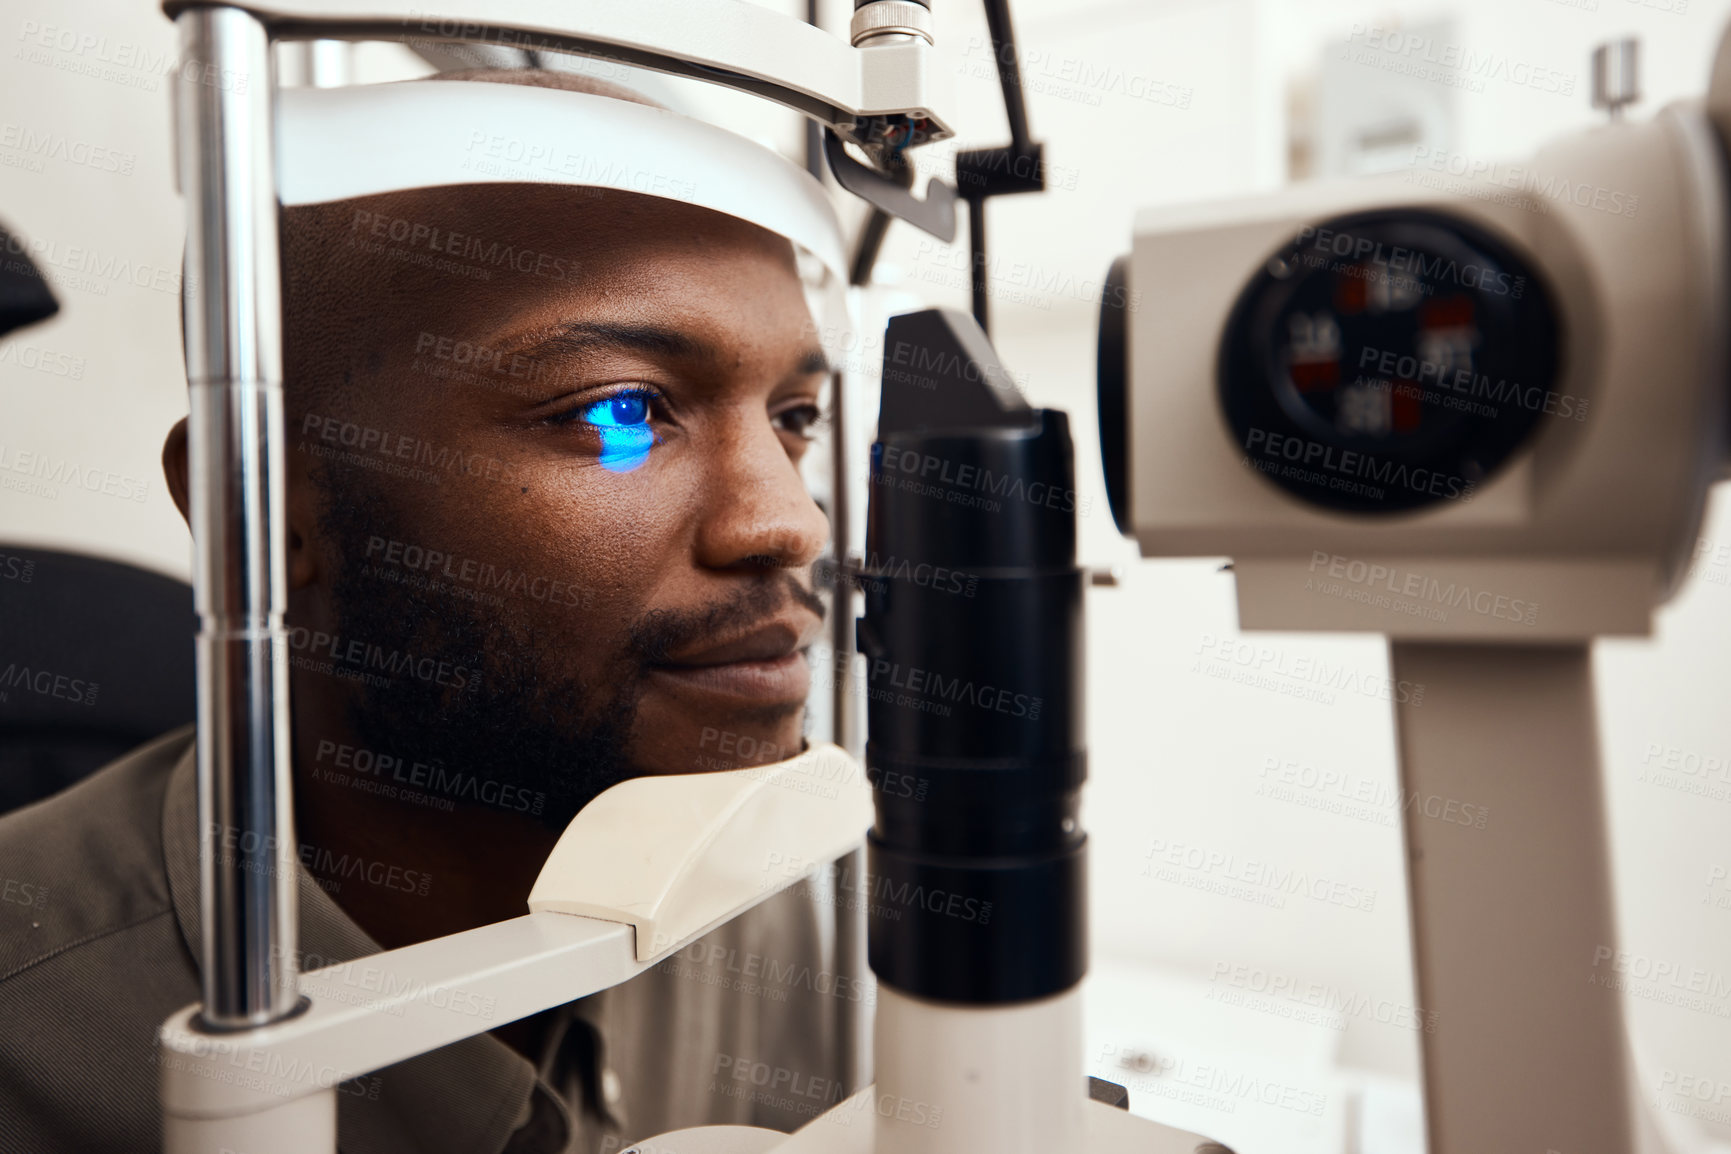 Buy stock photo Shot of a young man getting his eye’s examined with a slit lamp